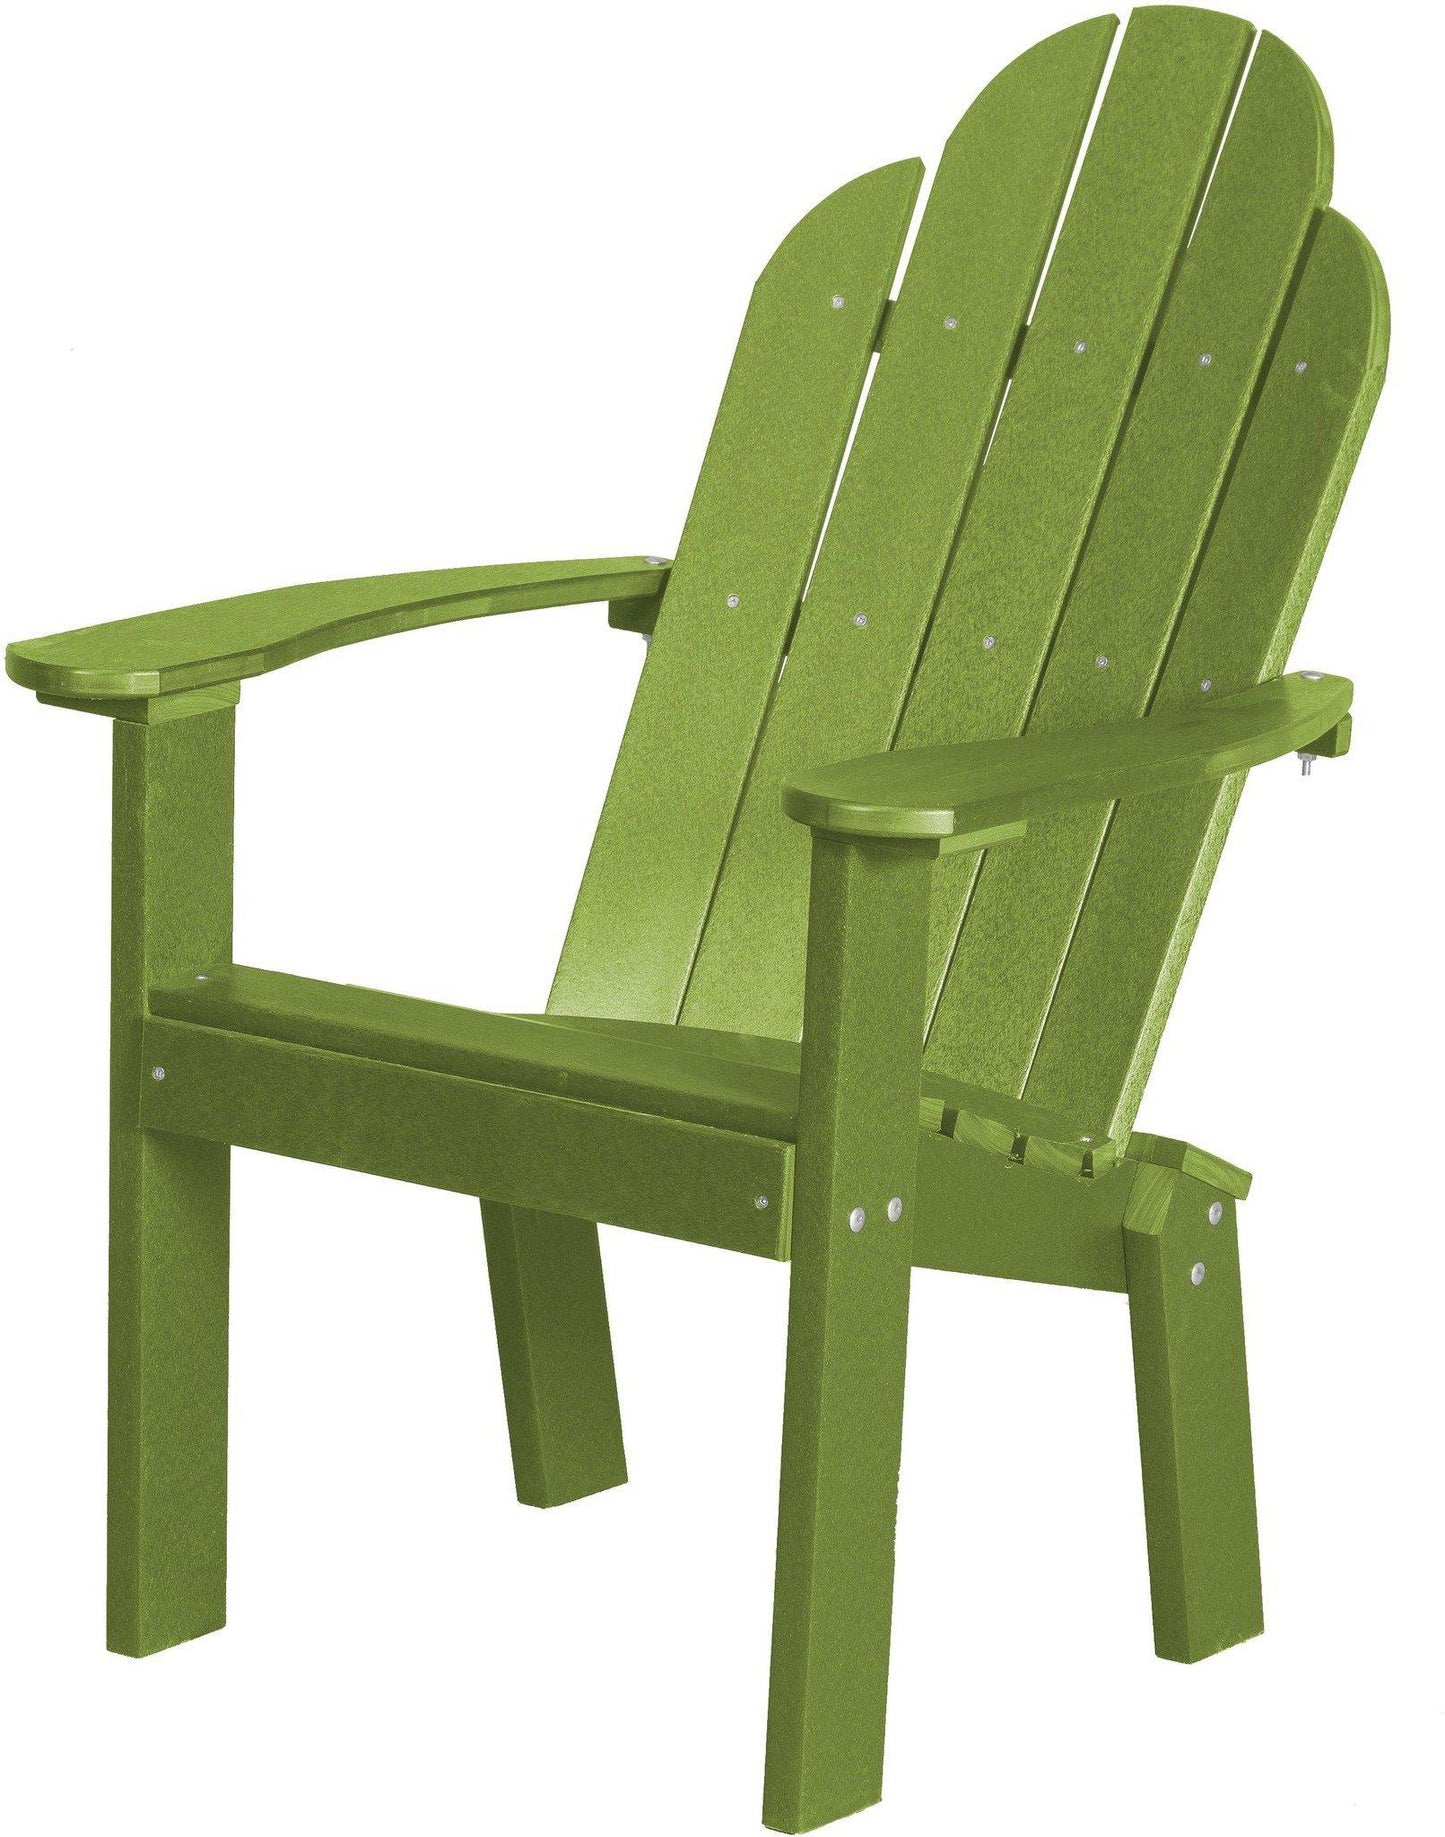 Wildridge Recycled Plastic Heritage Outdoor Dining / Deck Chair - LEAD TIME TO SHIP 6 WEEKS OR LESS